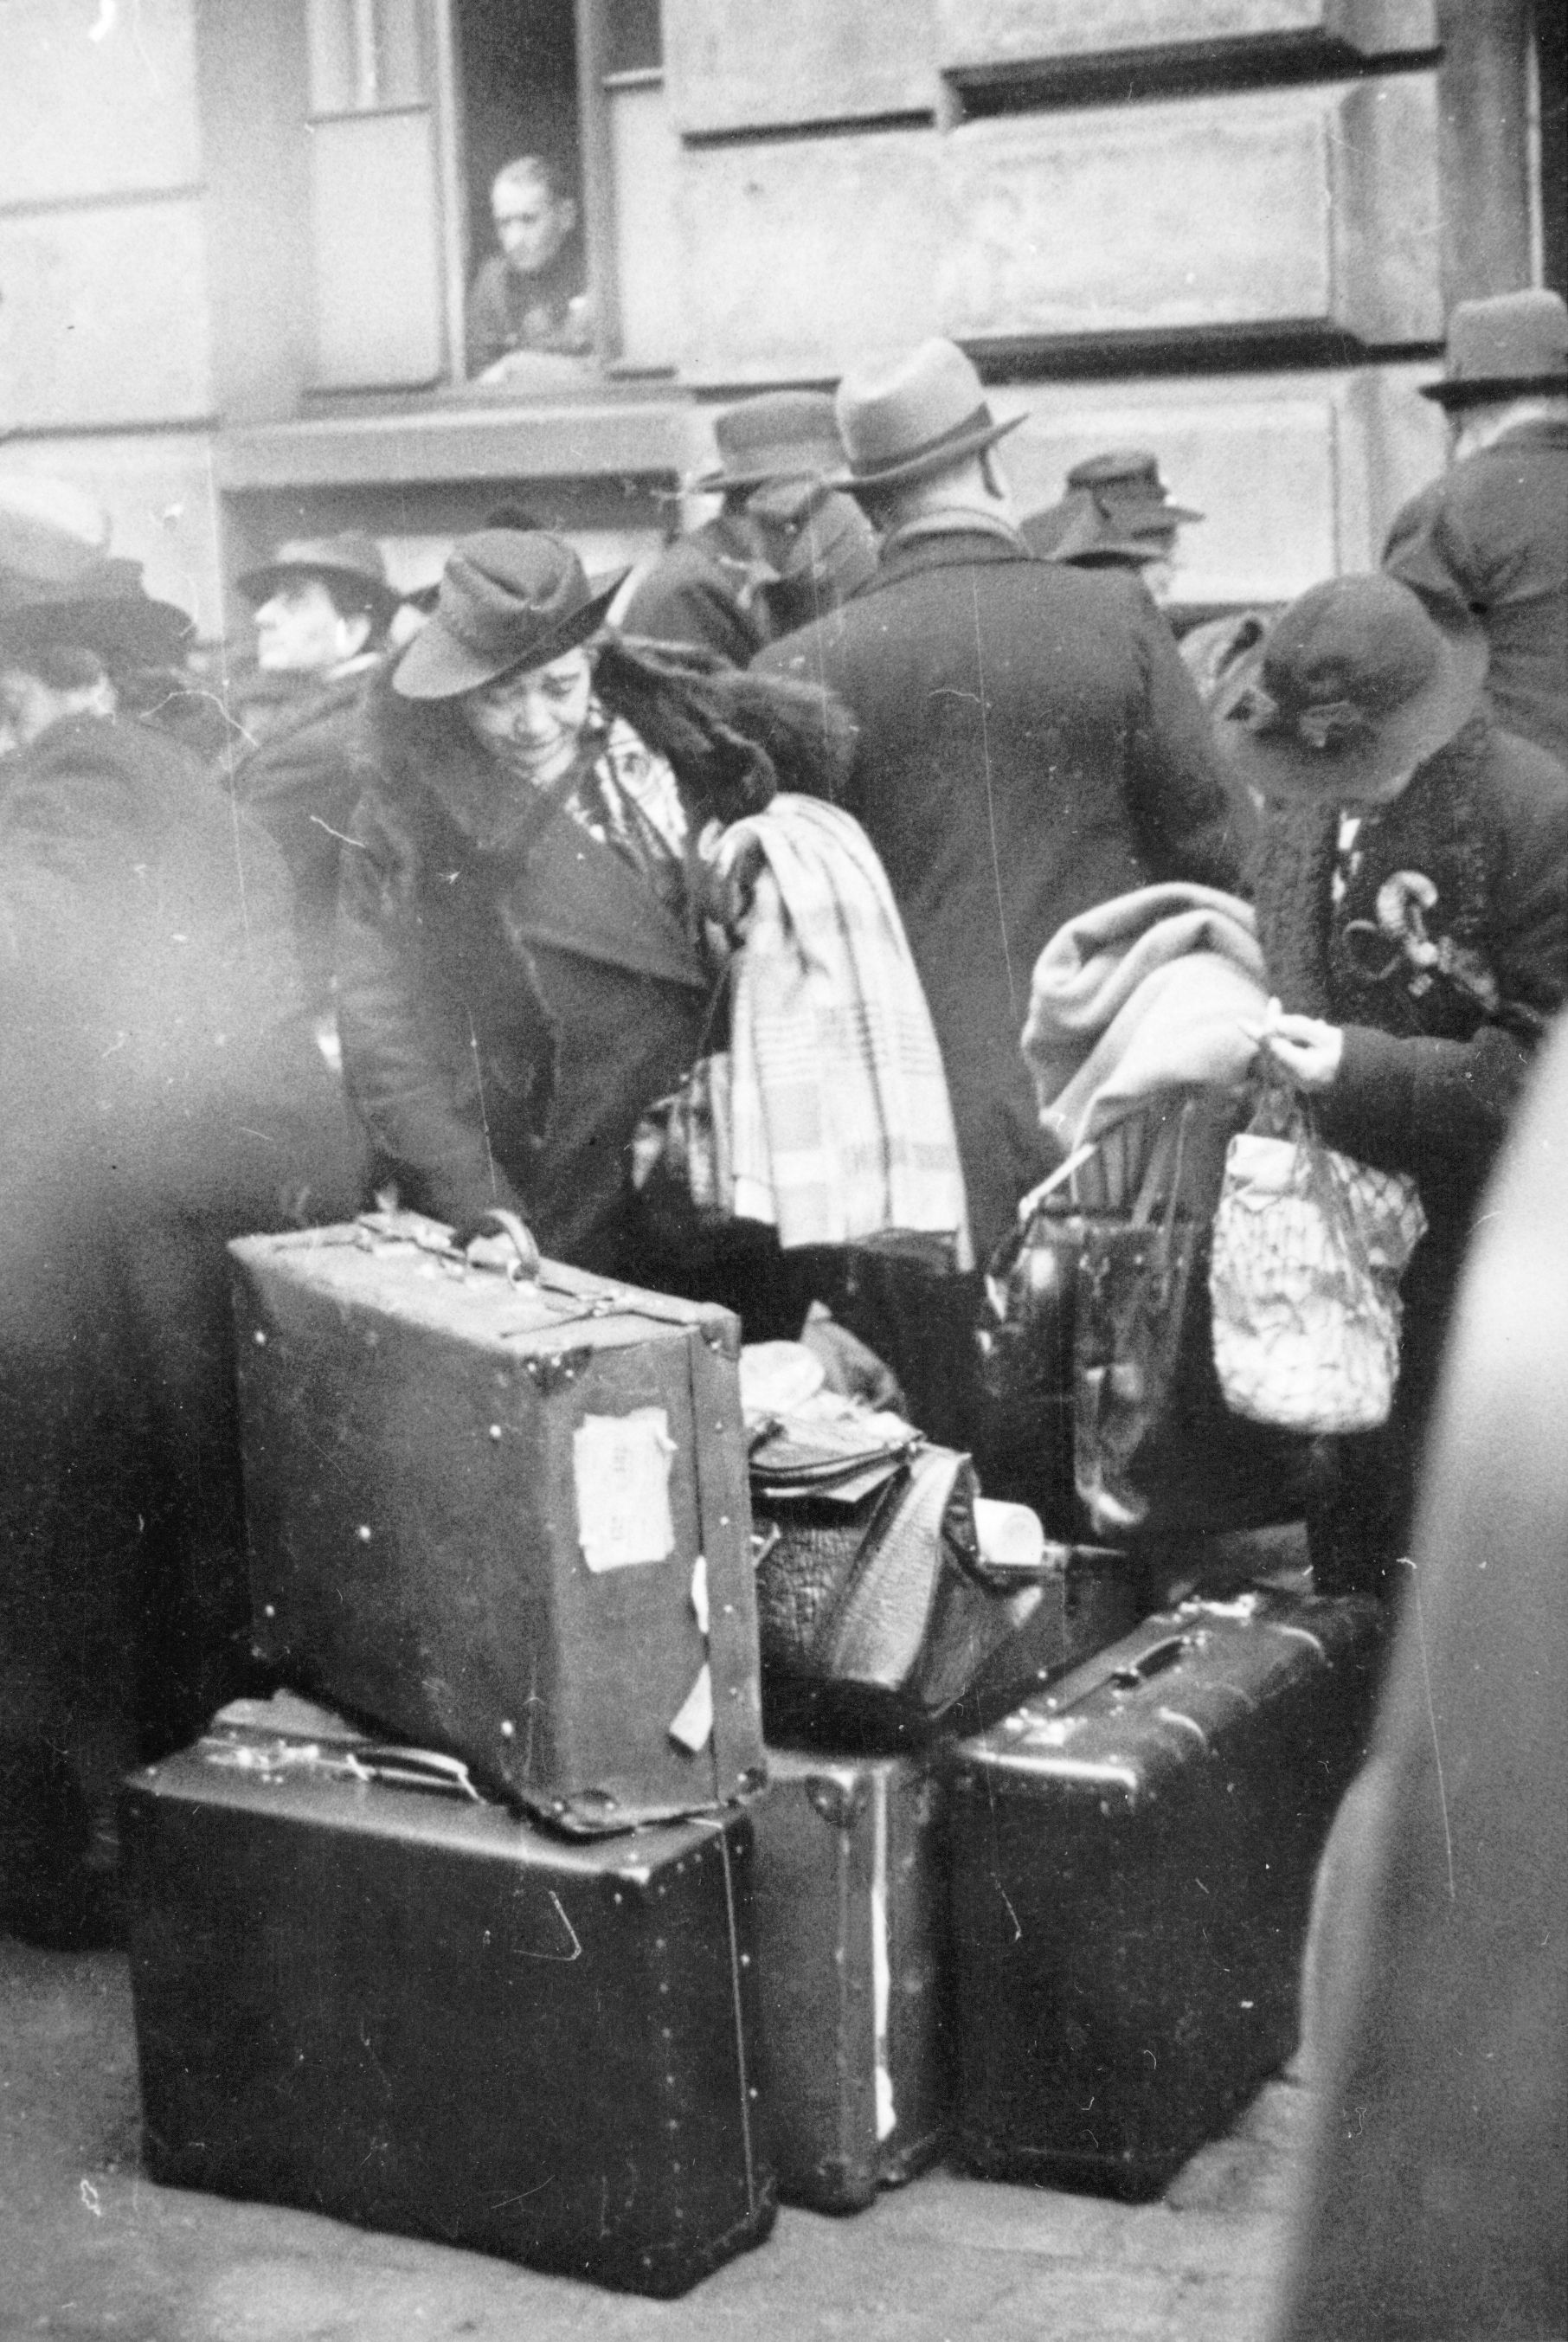 Deportation from Germany bound for Gurs Internment Camp